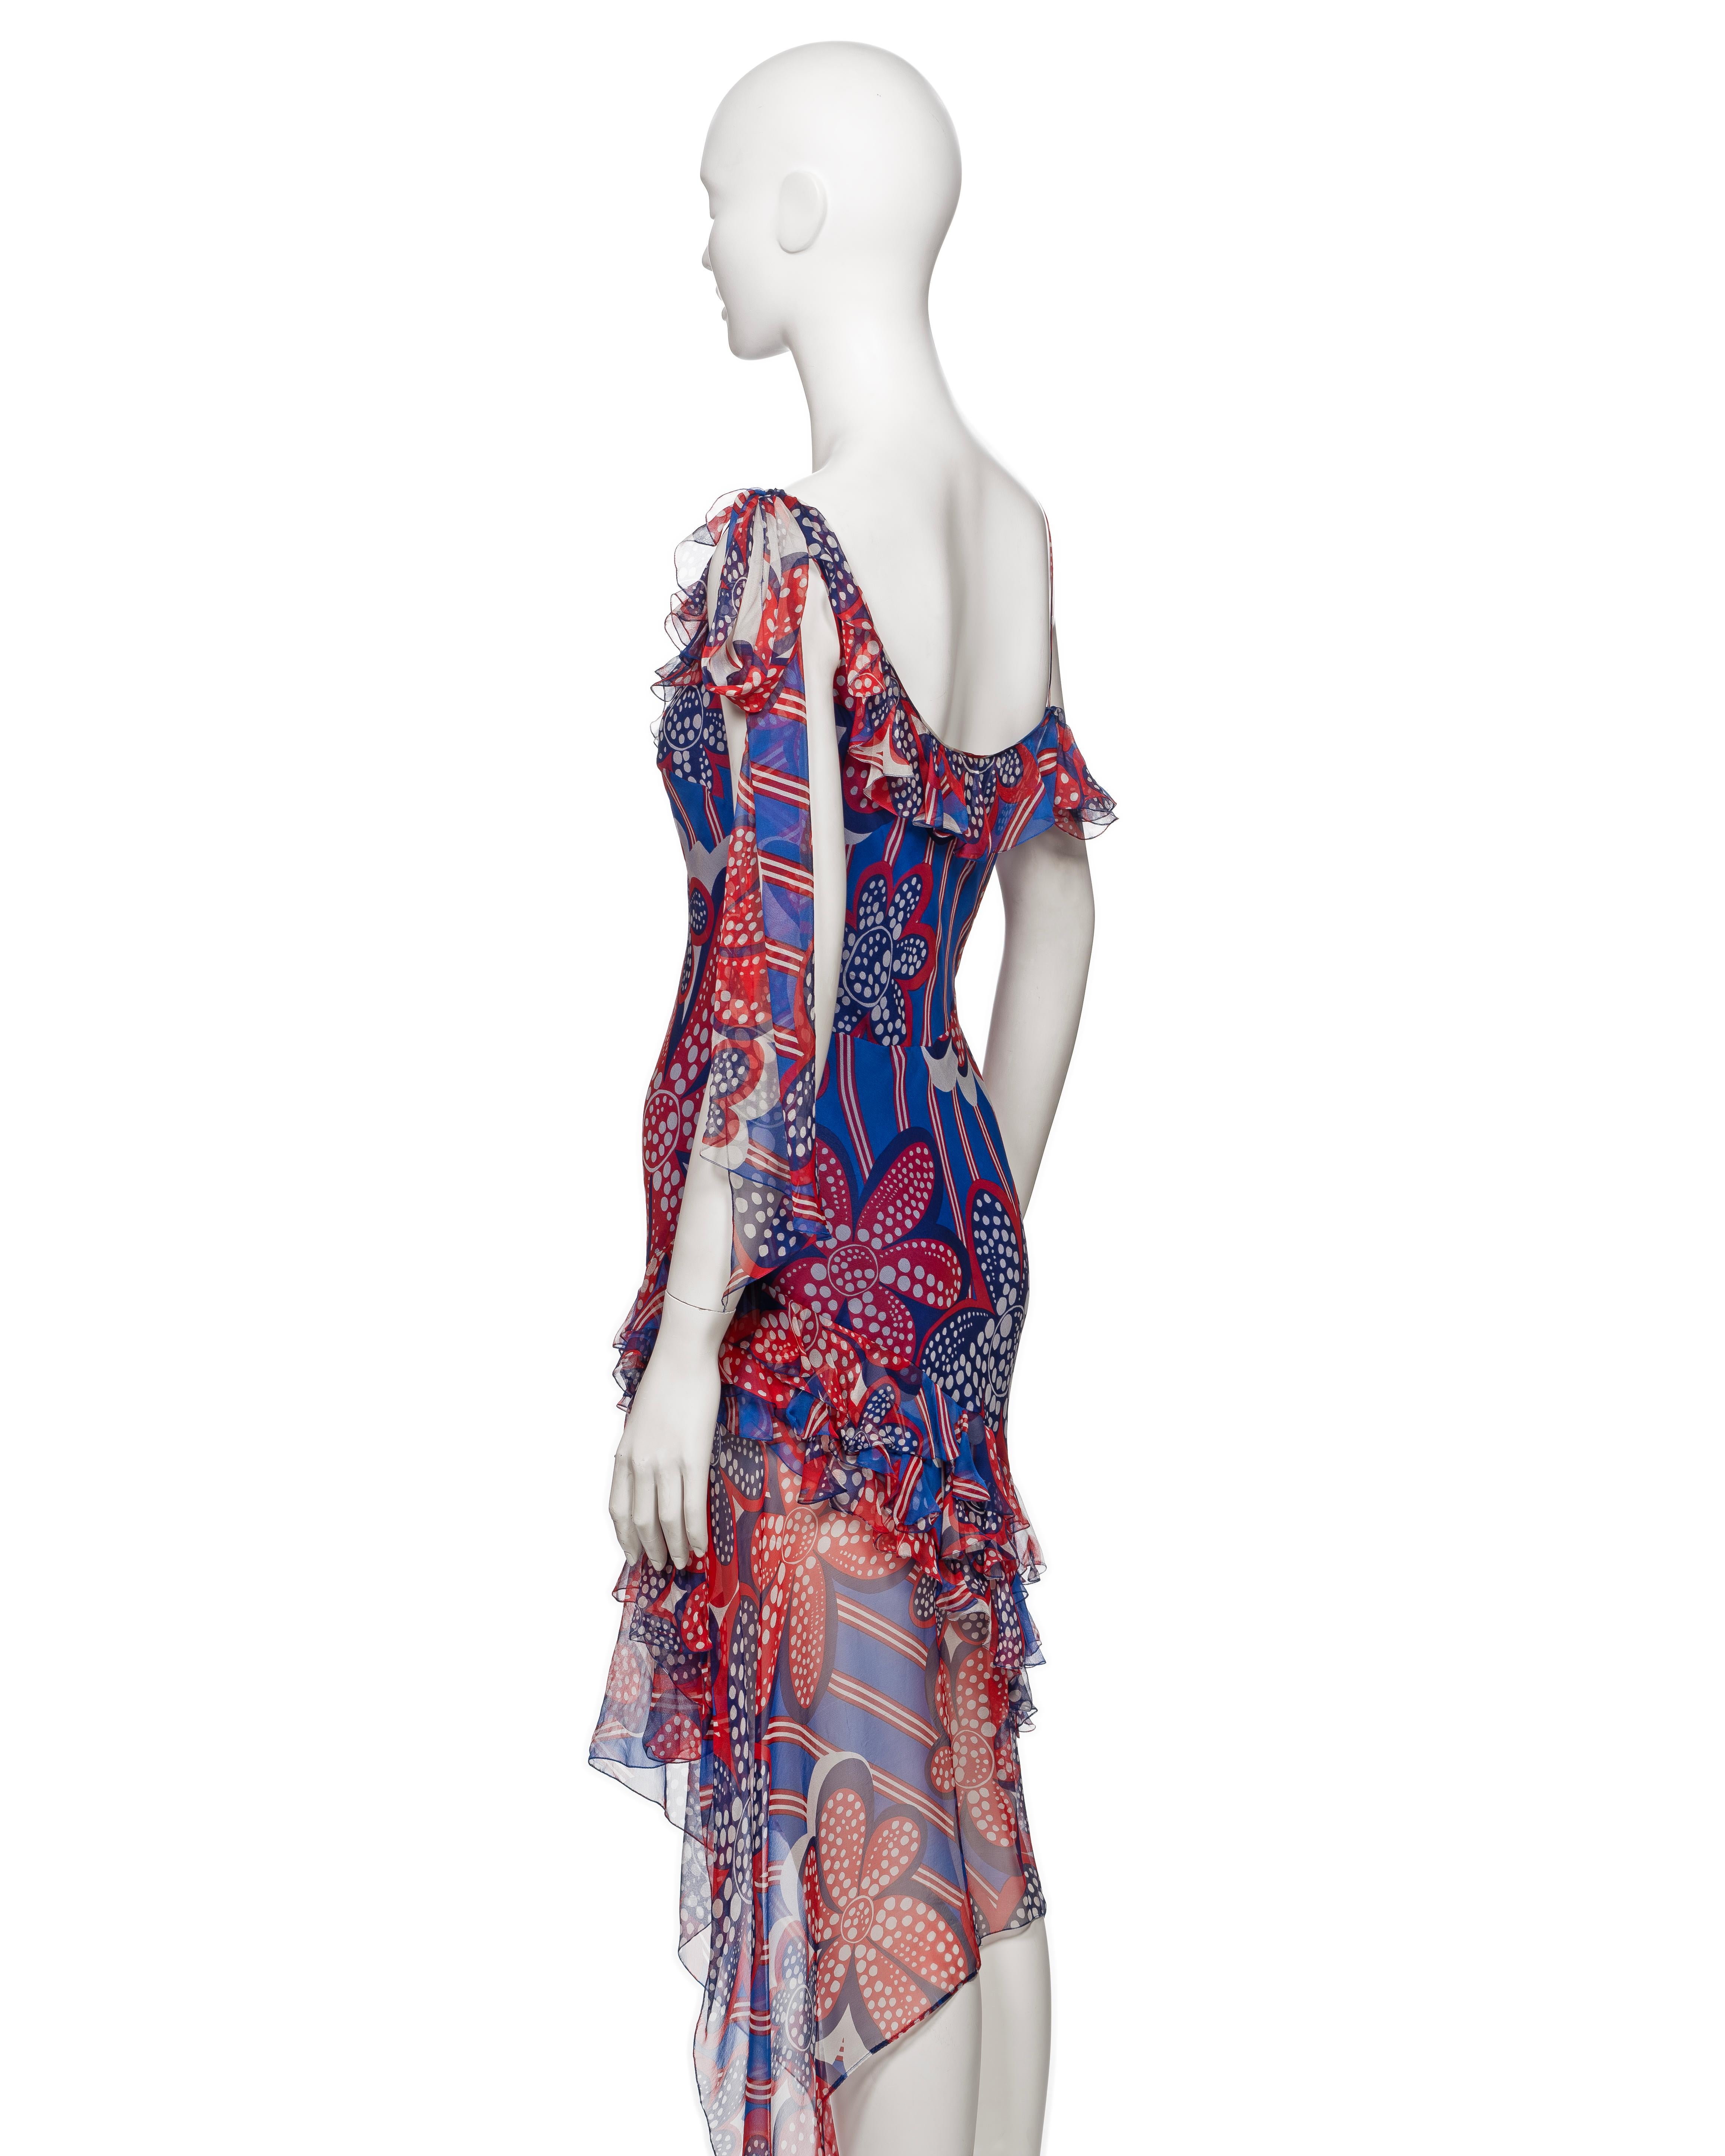 John Galliano Red and Blue Floral Print Silk Chiffon Slip Dress, SS 2002 For Sale 3